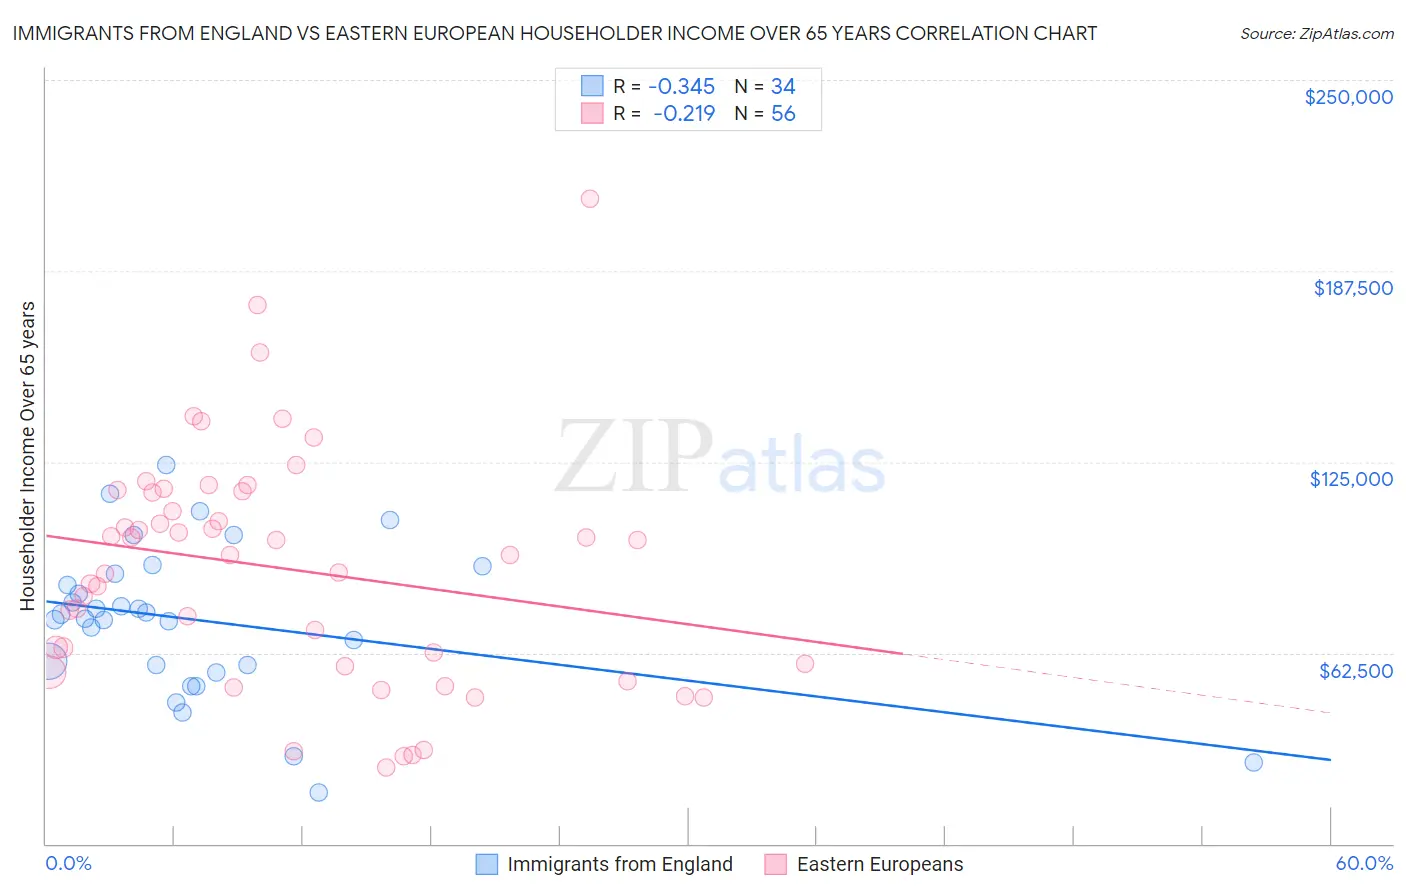 Immigrants from England vs Eastern European Householder Income Over 65 years